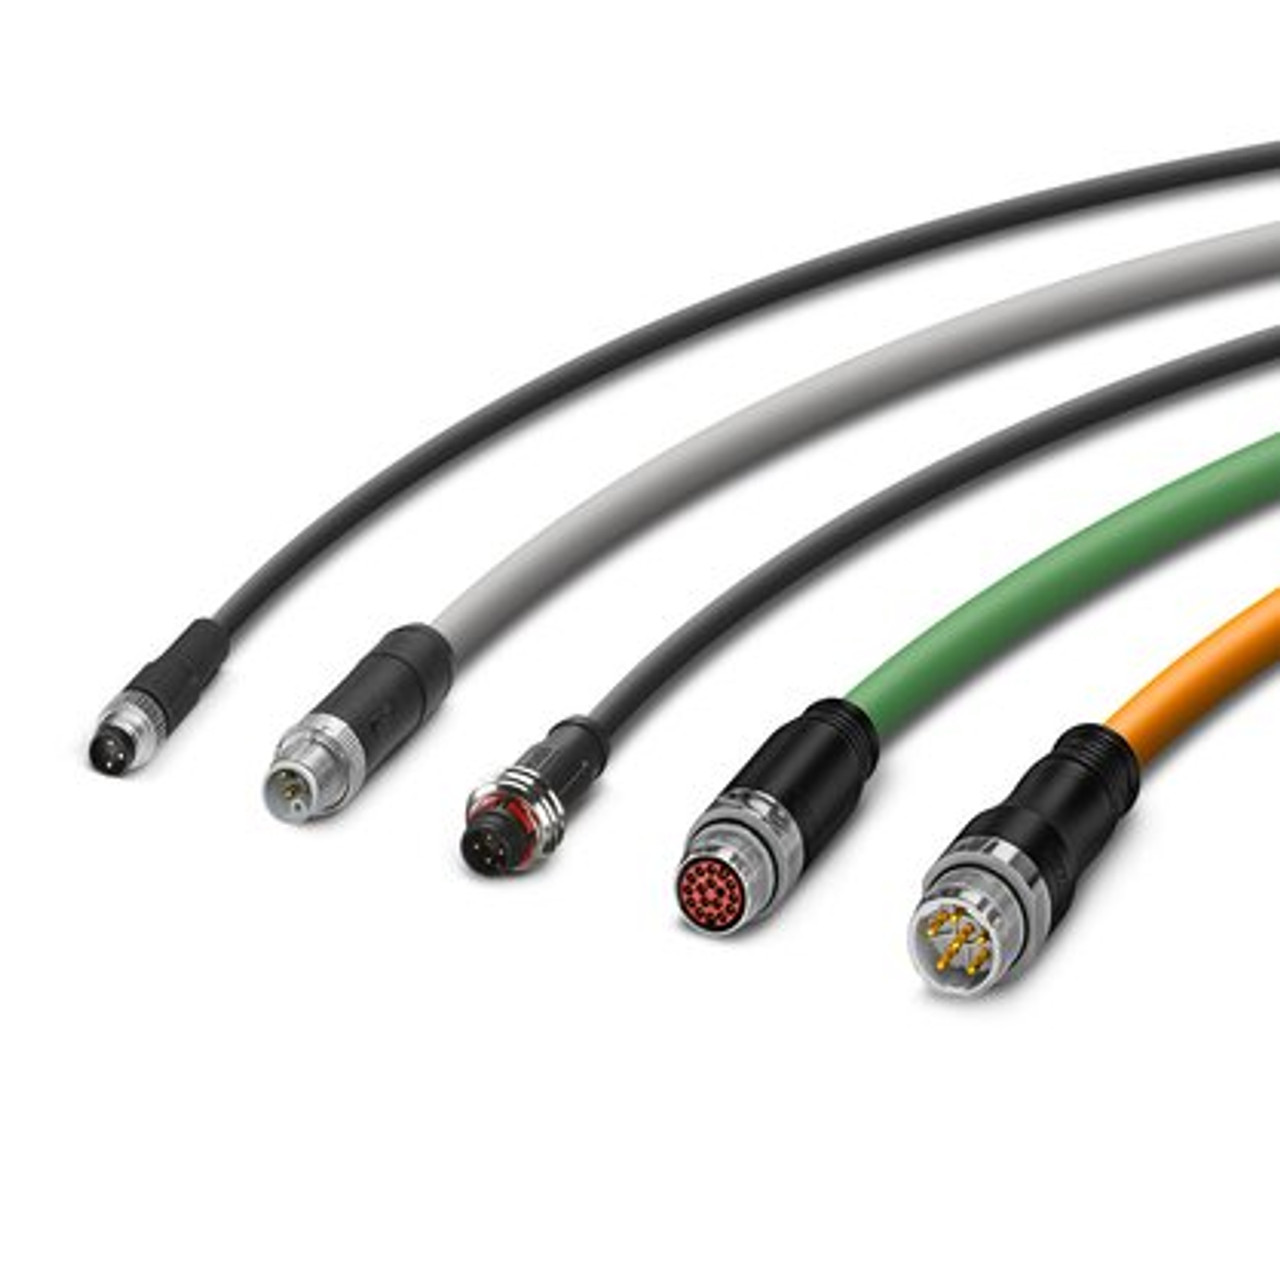 JW068A | HP | ANT-CBL-1 1M OUTDOOR RF signal cable 39.4" (1 m) Black